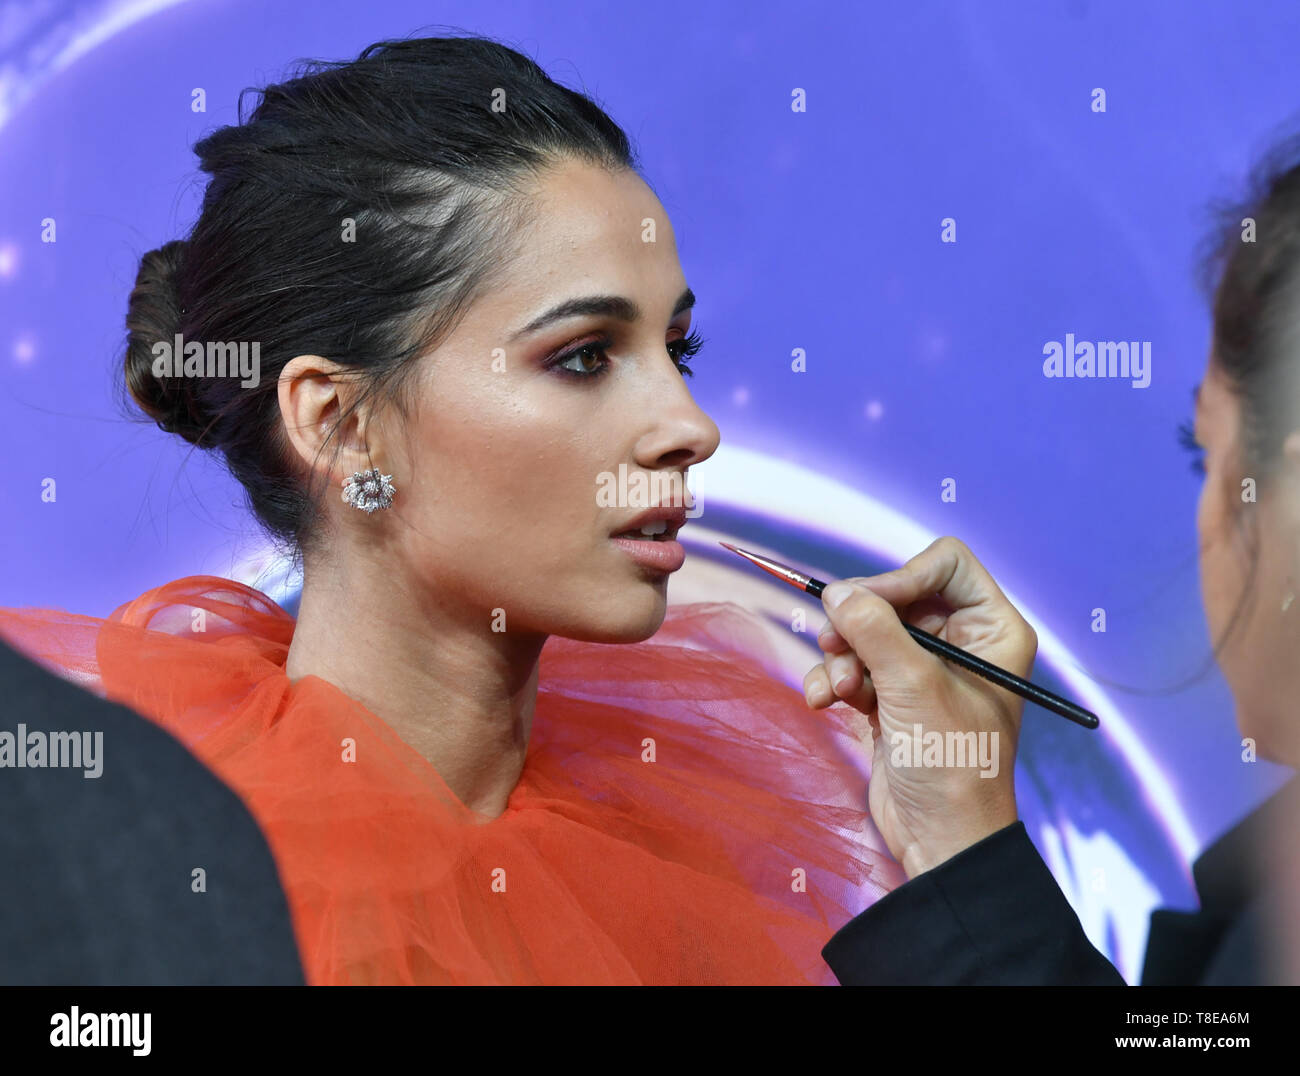 Berlin, Germany. 11th May, 2019. Actress Naomi Scott is painted on the carpet during the gala screening of the film 'Aladdin' at the cinema UCI Luxe Mercedes Square. The film will be released in German cinemas on 23.05.2019. The new Disney film is a real film adaptation of the 1992 cartoon of the same name and is based on the story Aladdin and the magic lamp from the fairy tales of 1001 Nights. Credit: Jens Kalaene/dpa-Zentralbild/dpa/Alamy Live News Stock Photo